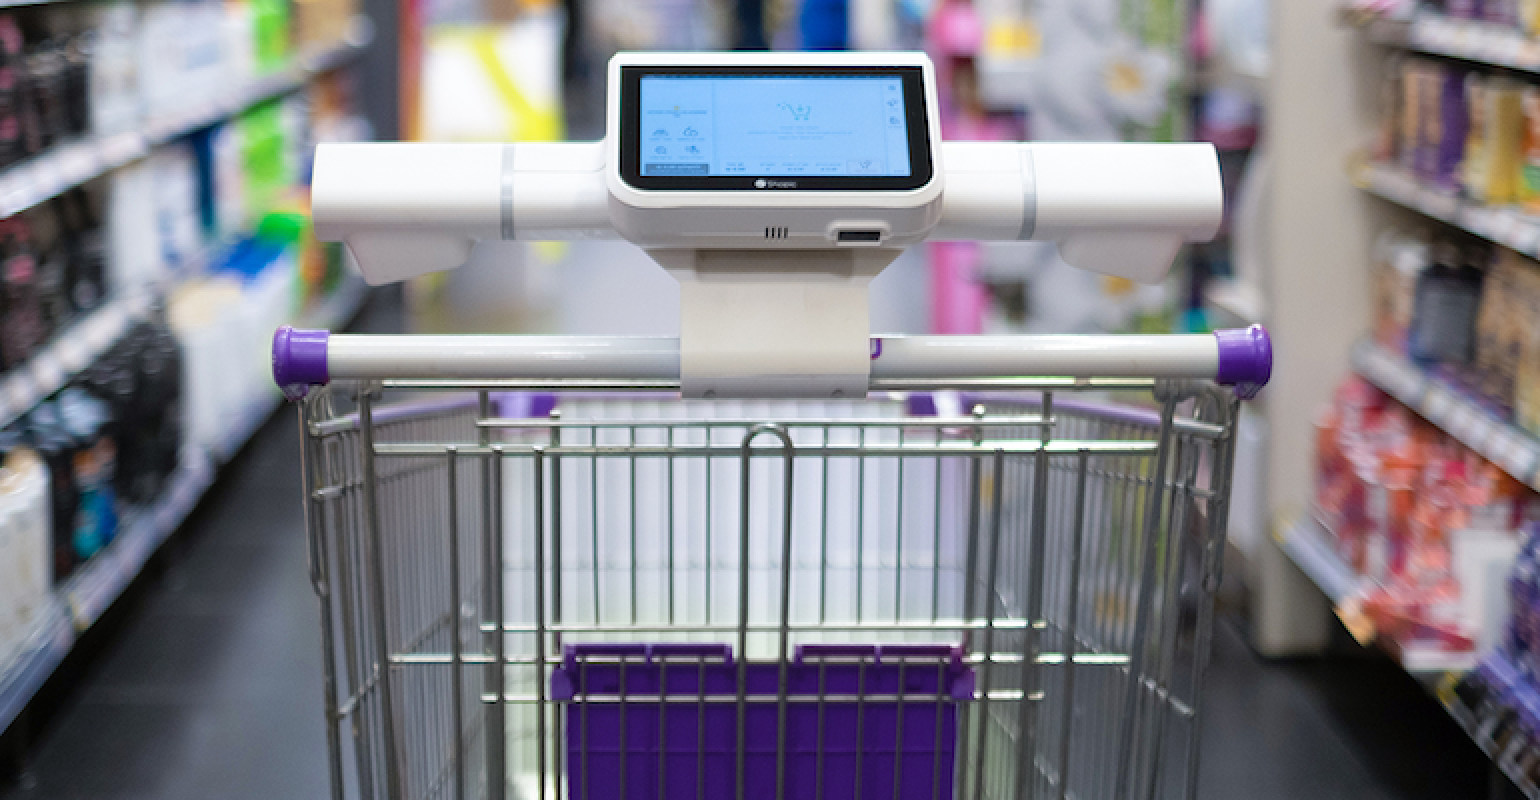 Smart shelf retail tags offered to help shopper experience